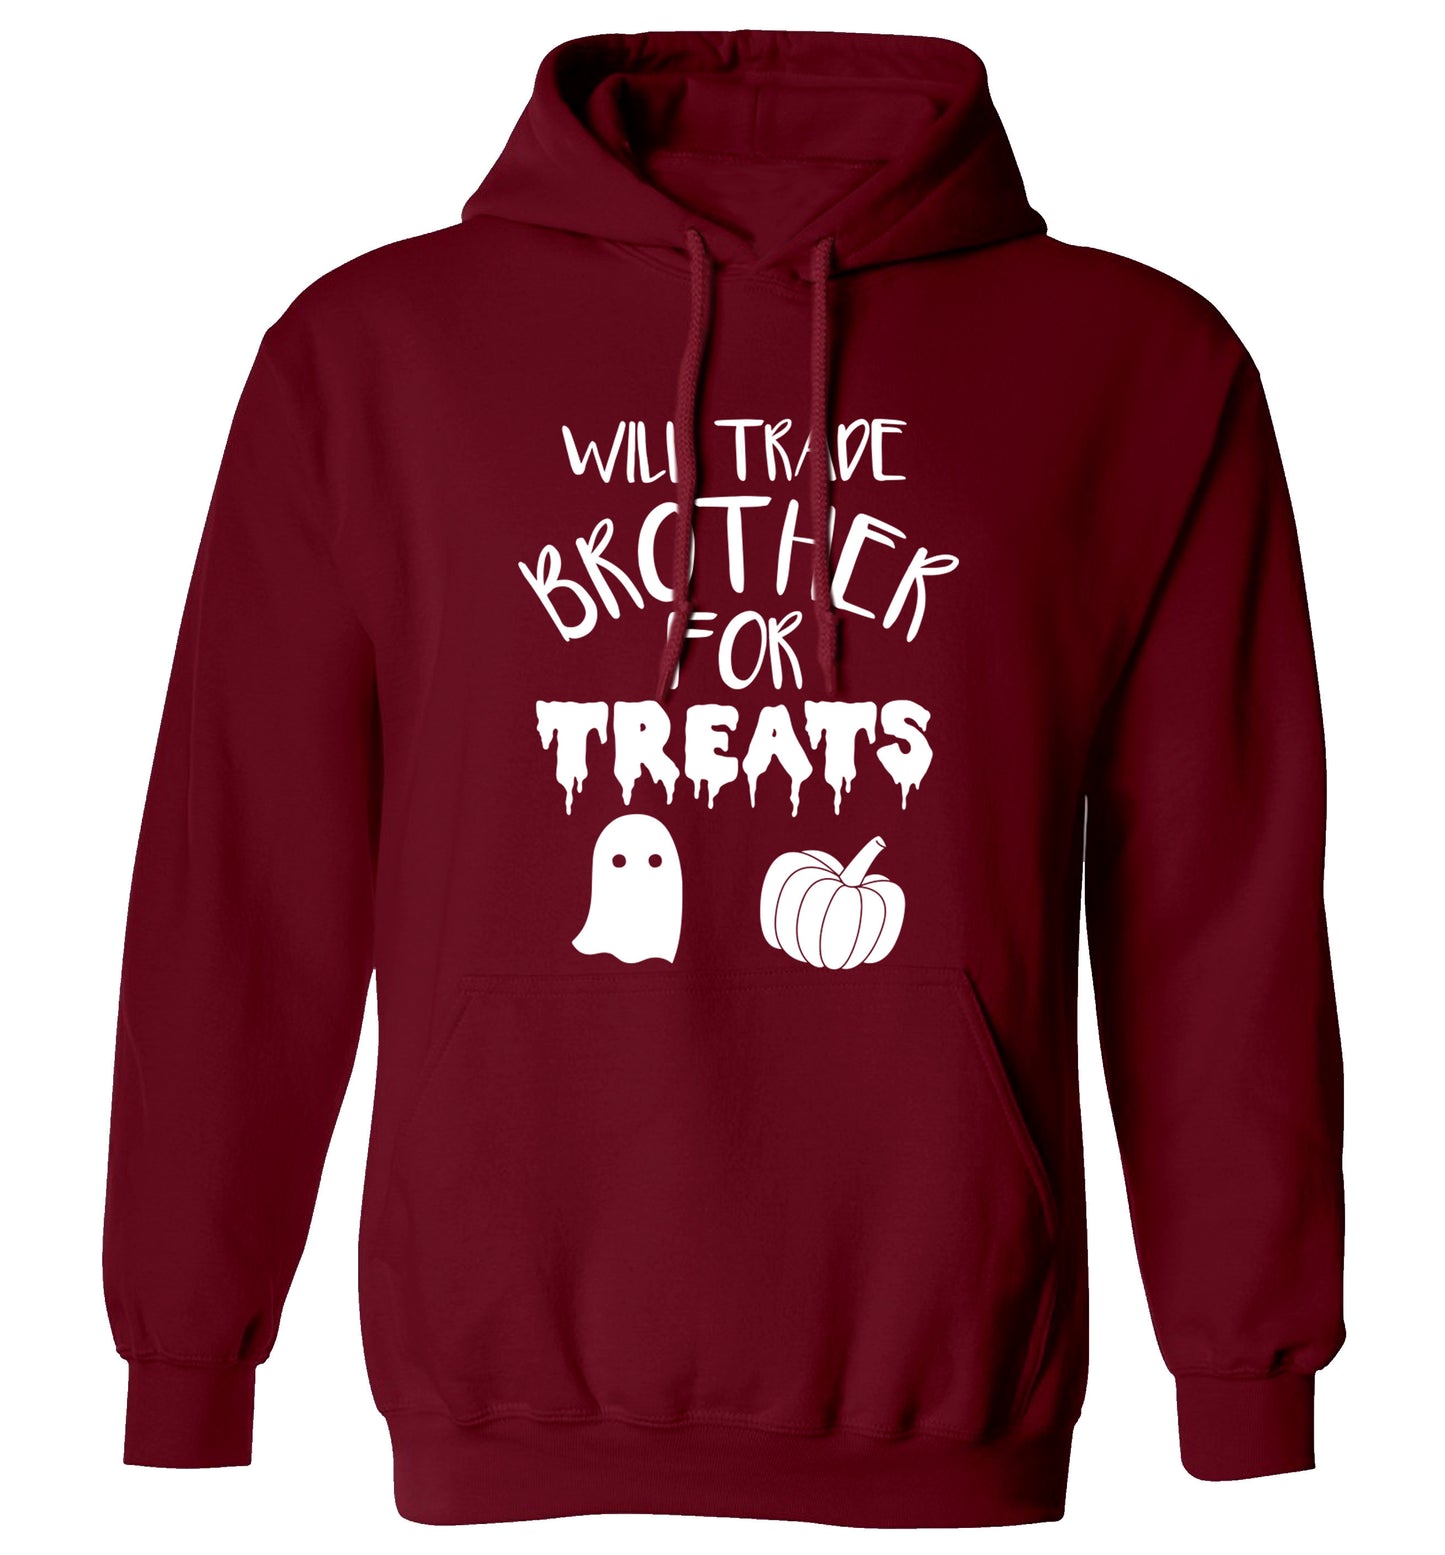 Will trade brother for treats adults unisex maroon hoodie 2XL